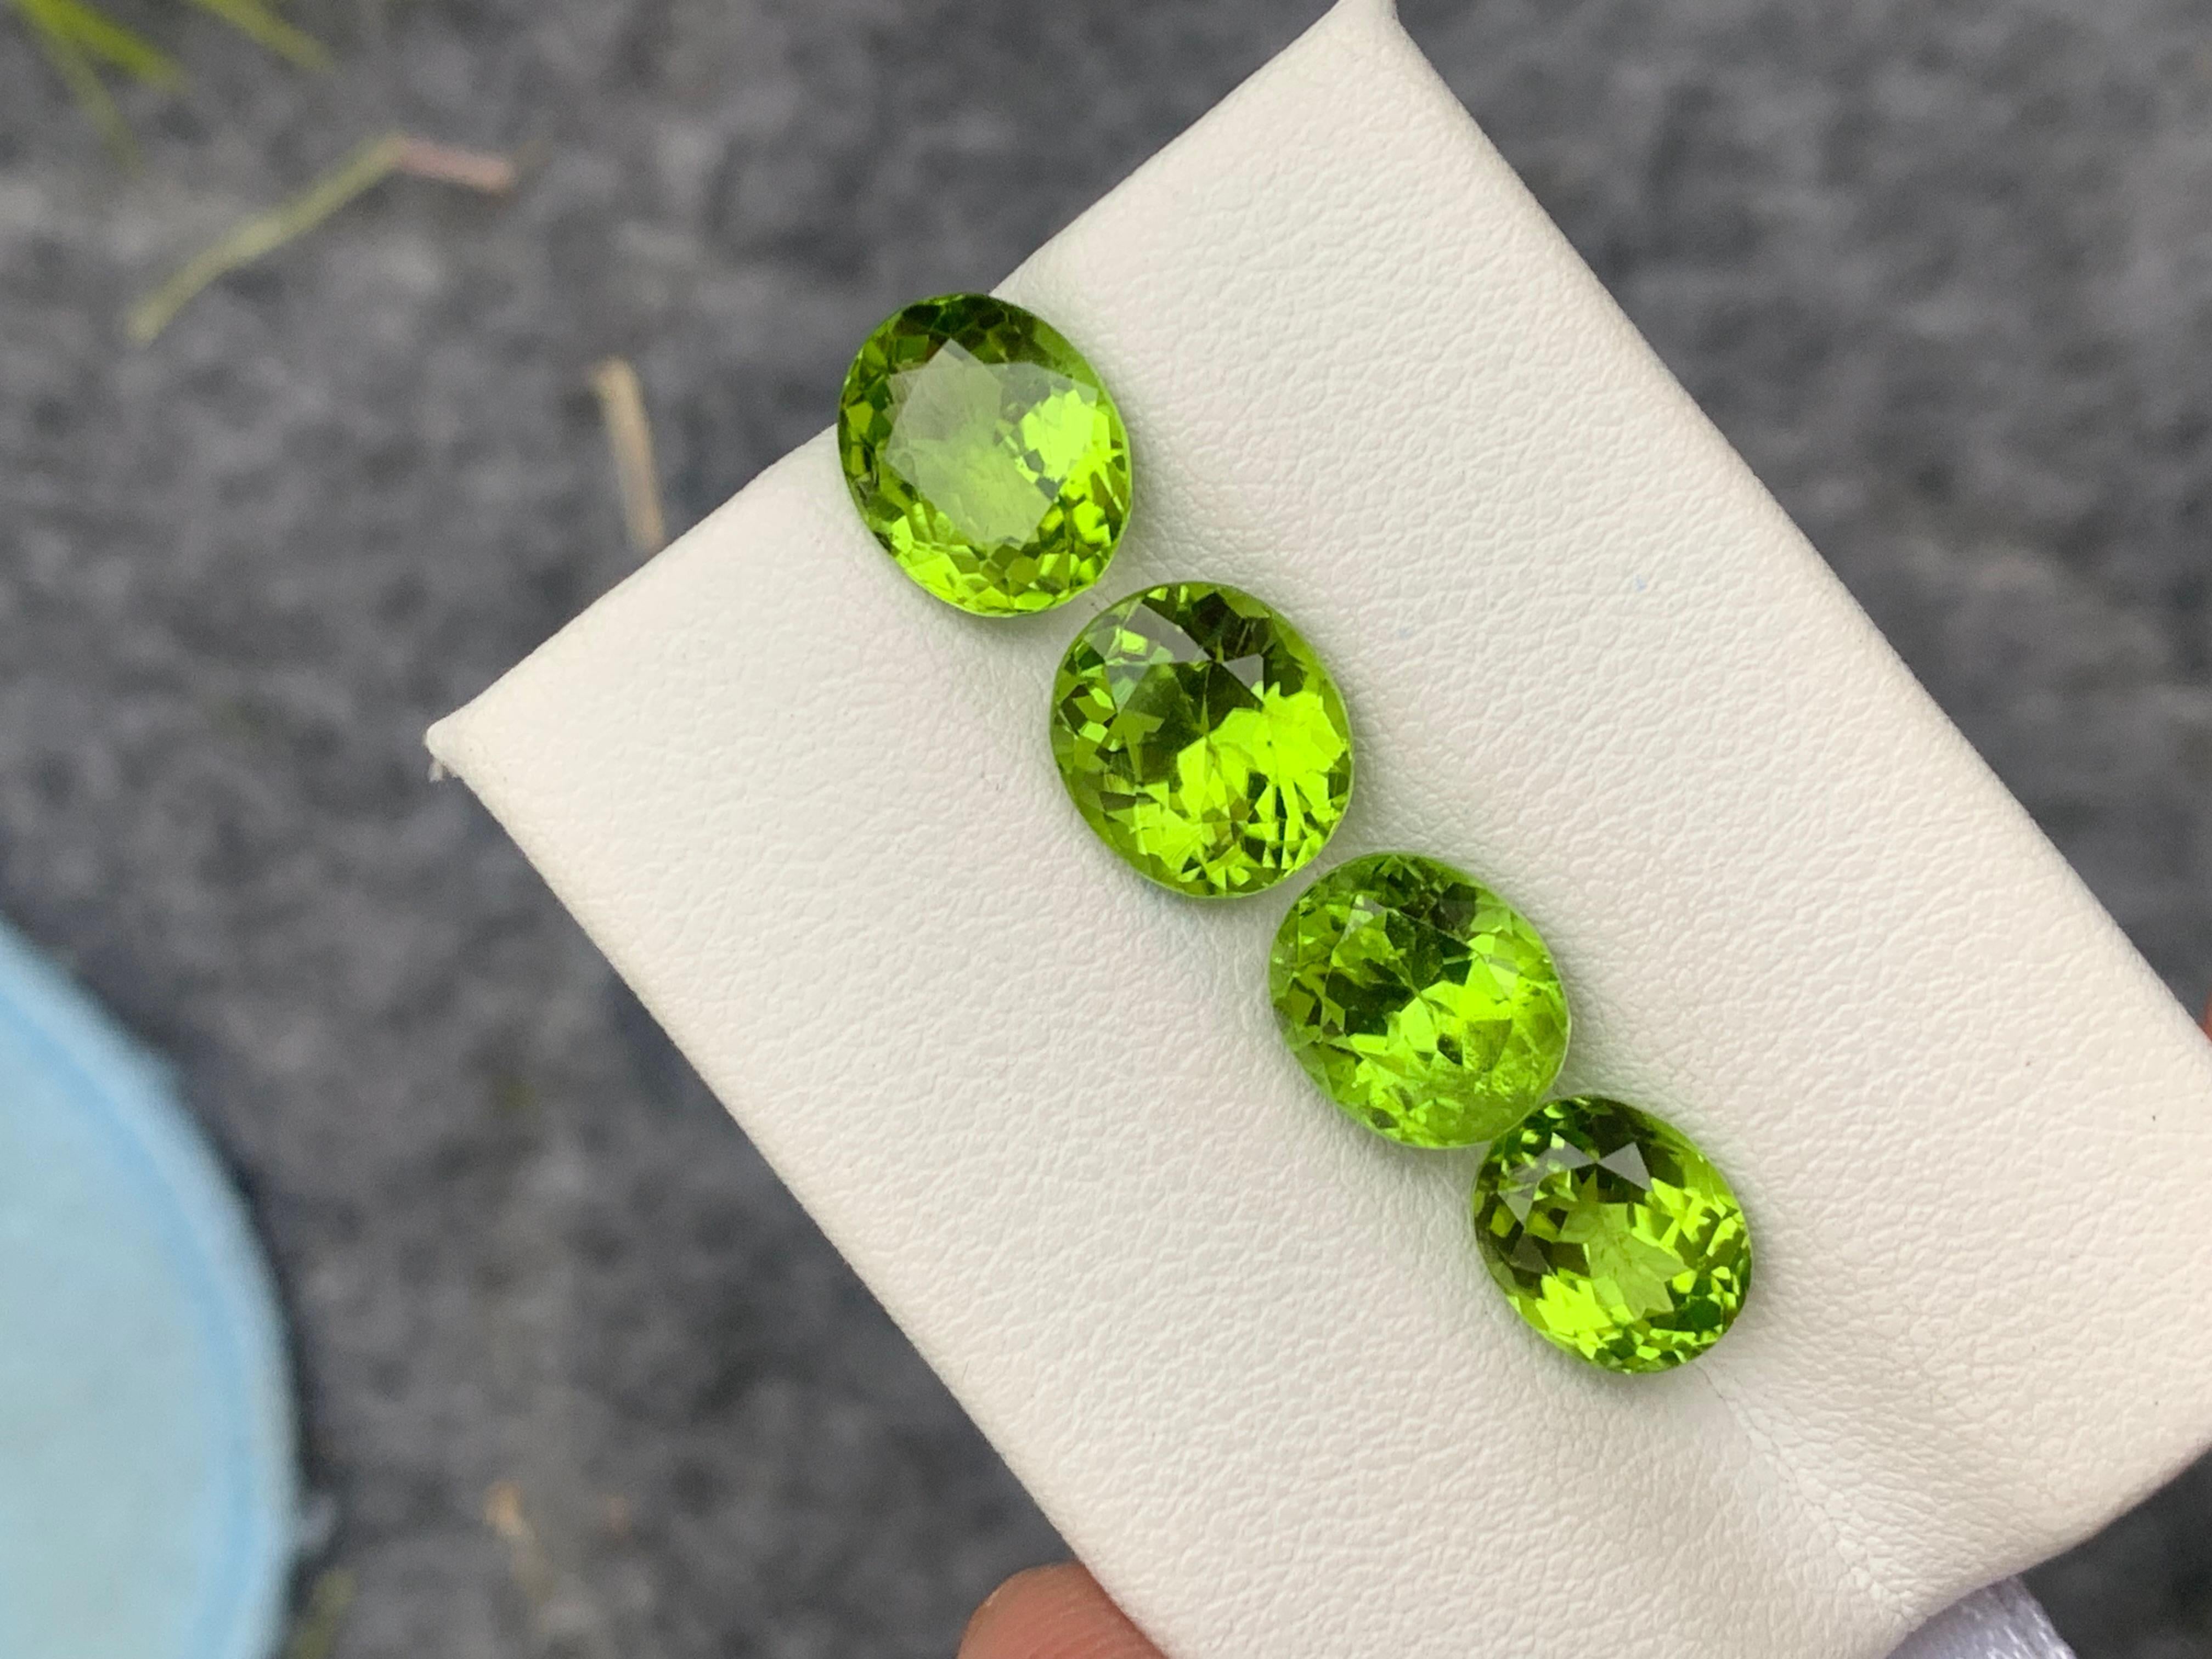 Gemstone Type : Peridot
Weight : 10.15 Carats
Size: 2.80, 2.80, 2.40, 2.10 Carats
Origin : Suppat Valley Pakistan
Clarity : Eye Clean
Certificate: On Demand
Color: Green
Treatment: Non
Shape: Cushion
It helps cure diseases related to lungs, breasts,